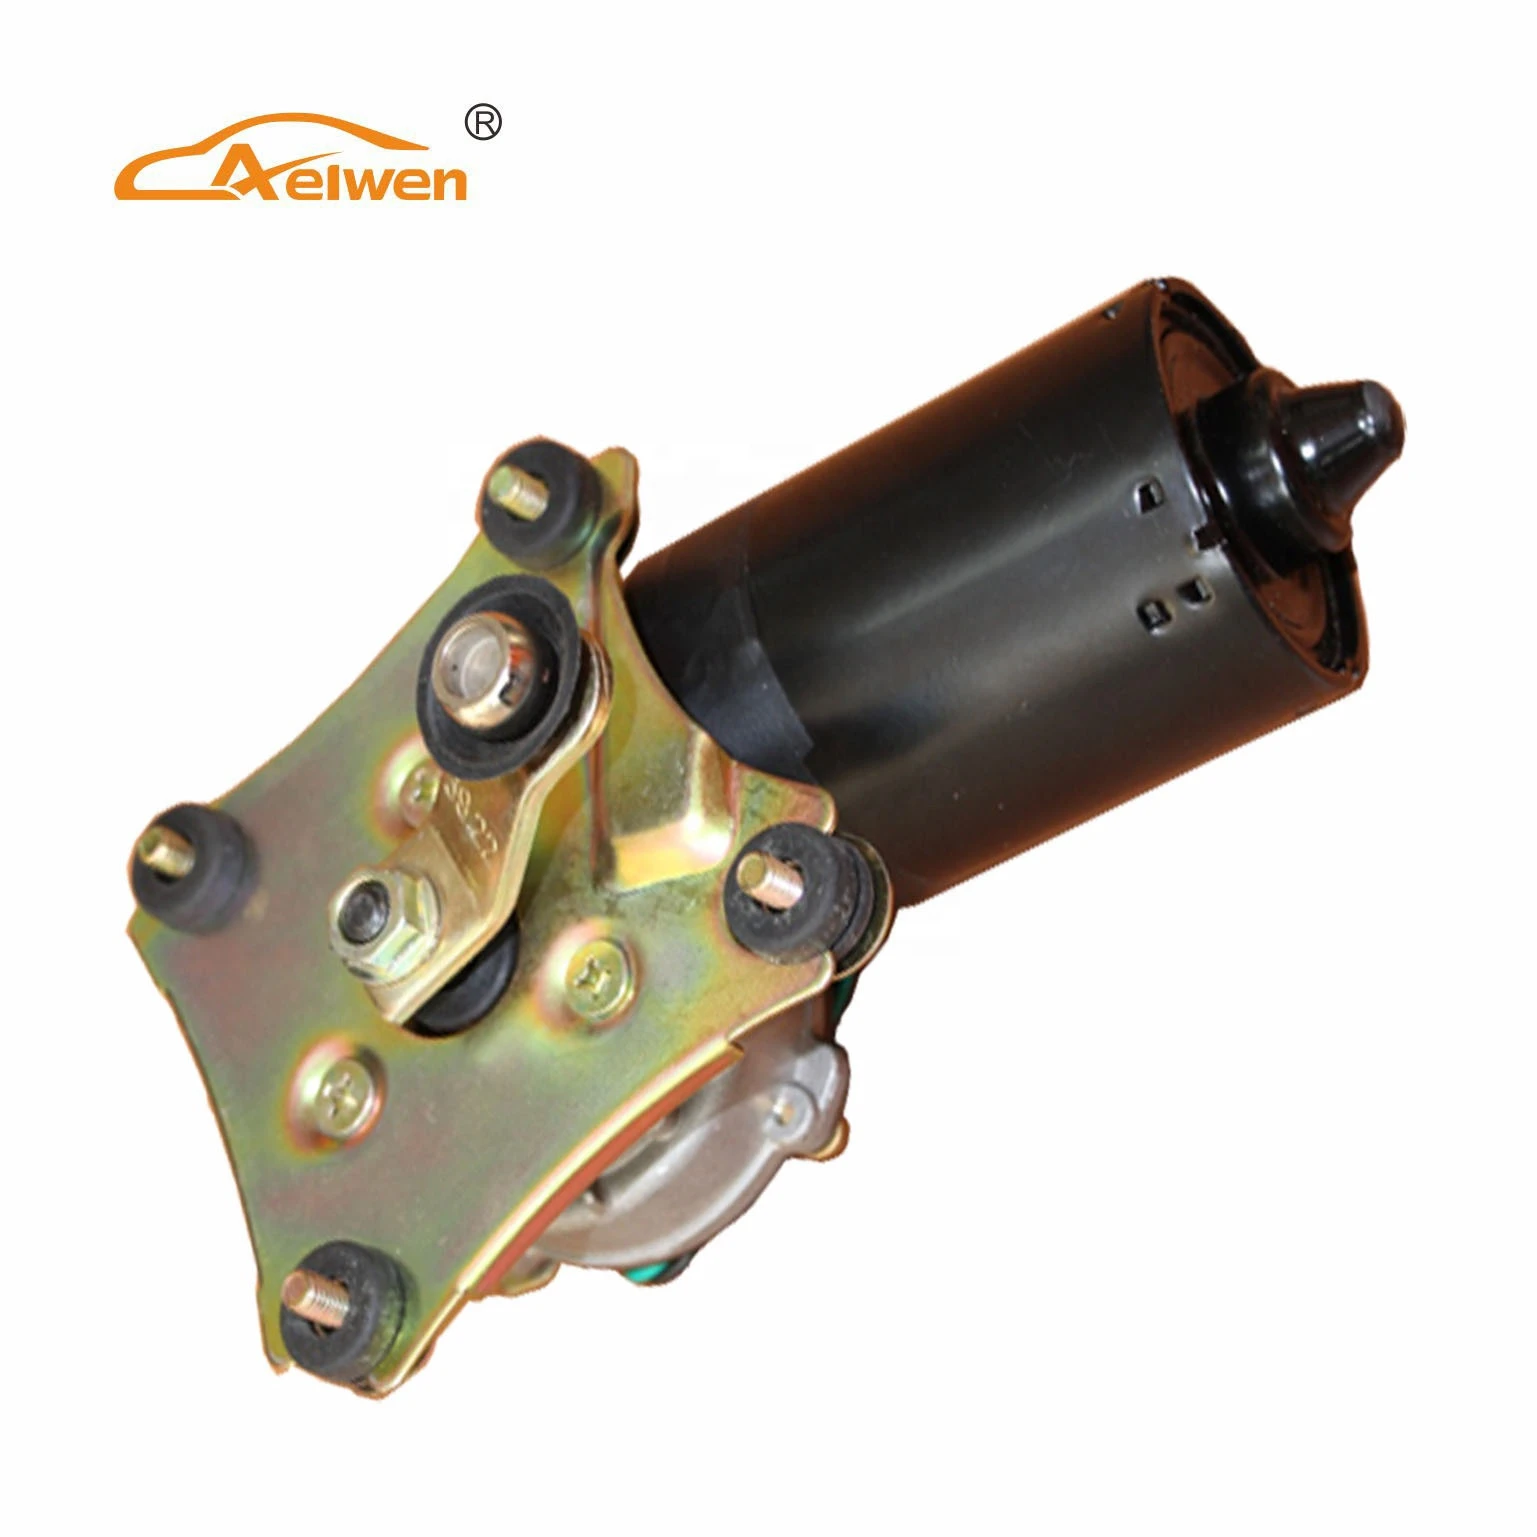 SDK13505 Aelwen Front Wiper Motor Fit For Mazda 323 FWD 86-